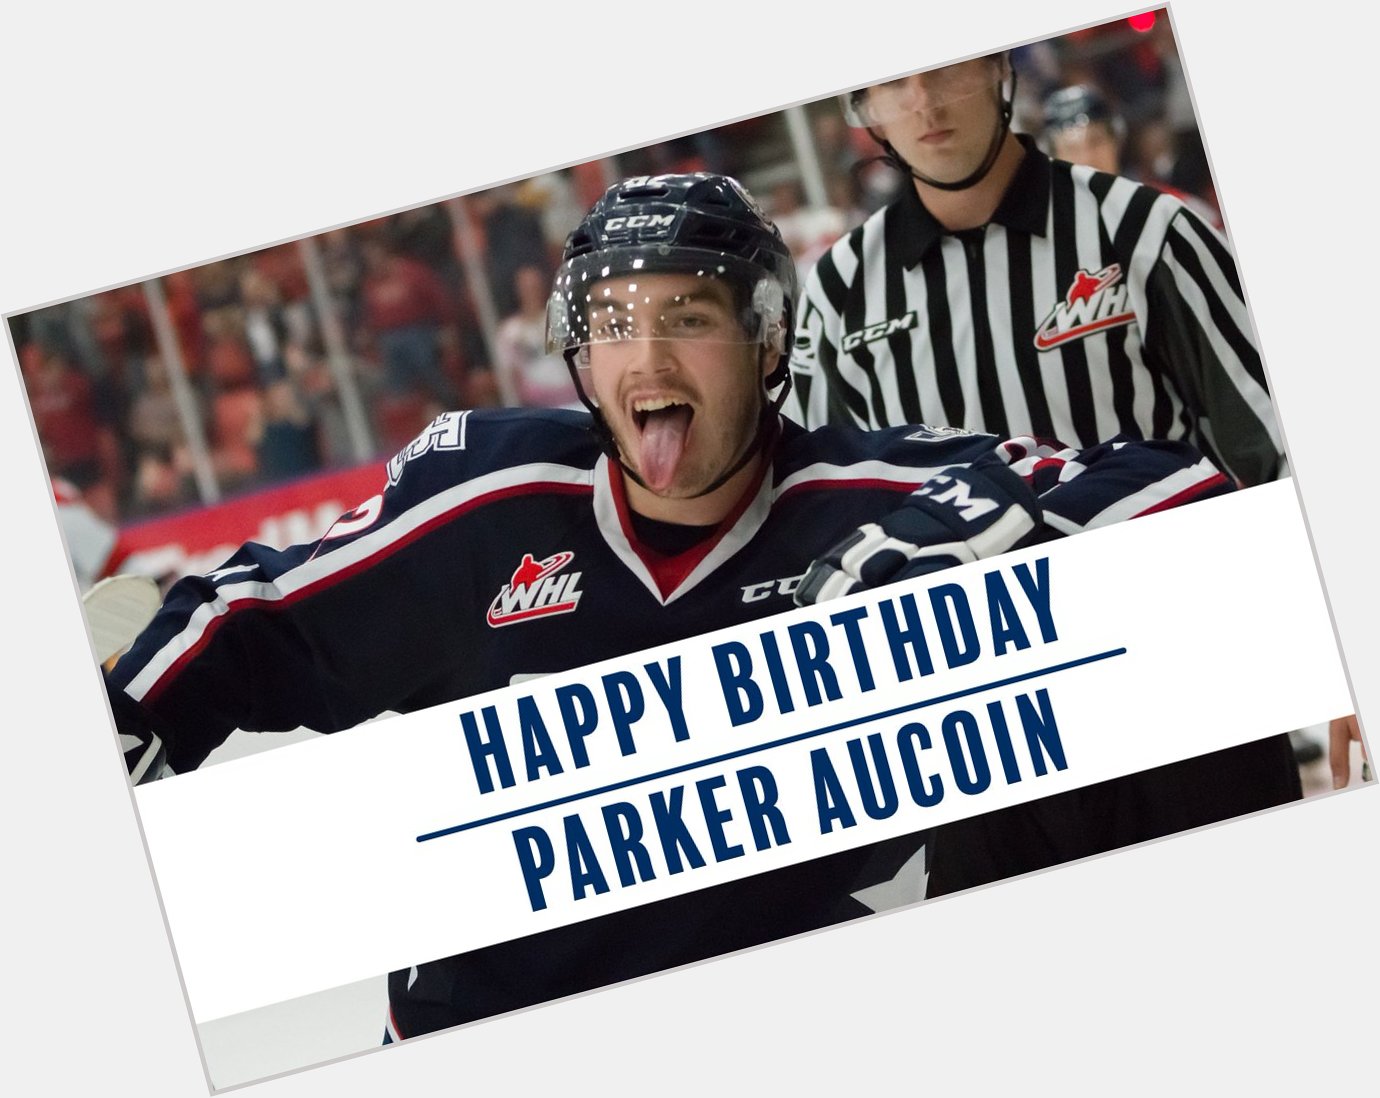 Happy Birthday to the best Gene Simmons impersonator out there, Parker AuCoin! 